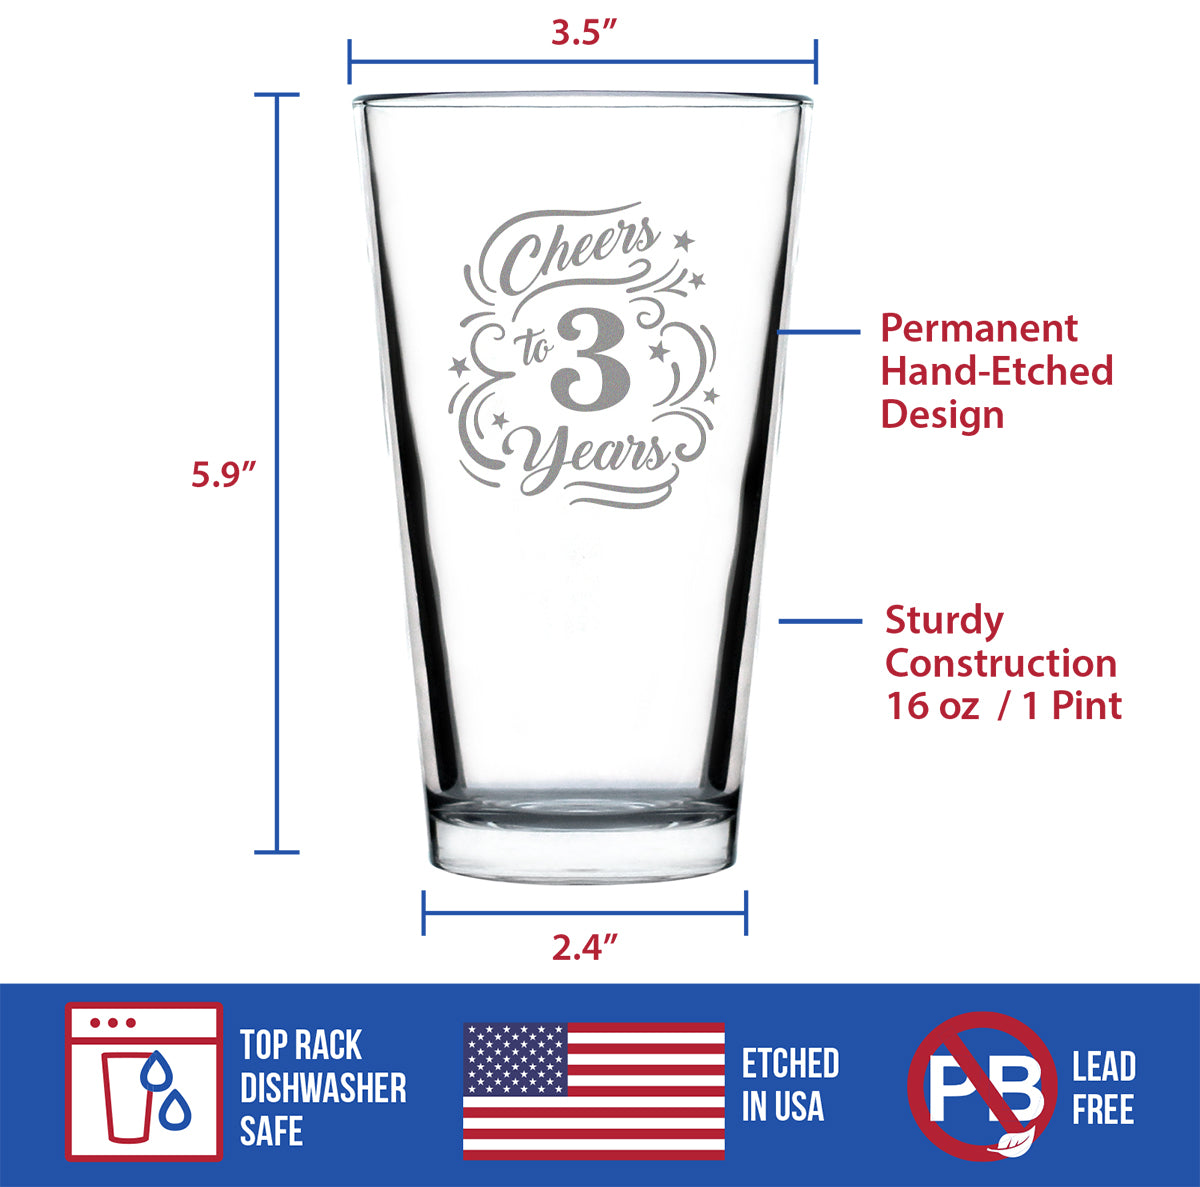 Cheers to 3 Years - Pint Glass for Beer - Gifts for Women &amp; Men - 3rd Anniversary Party Decor - 16 Oz Glasses